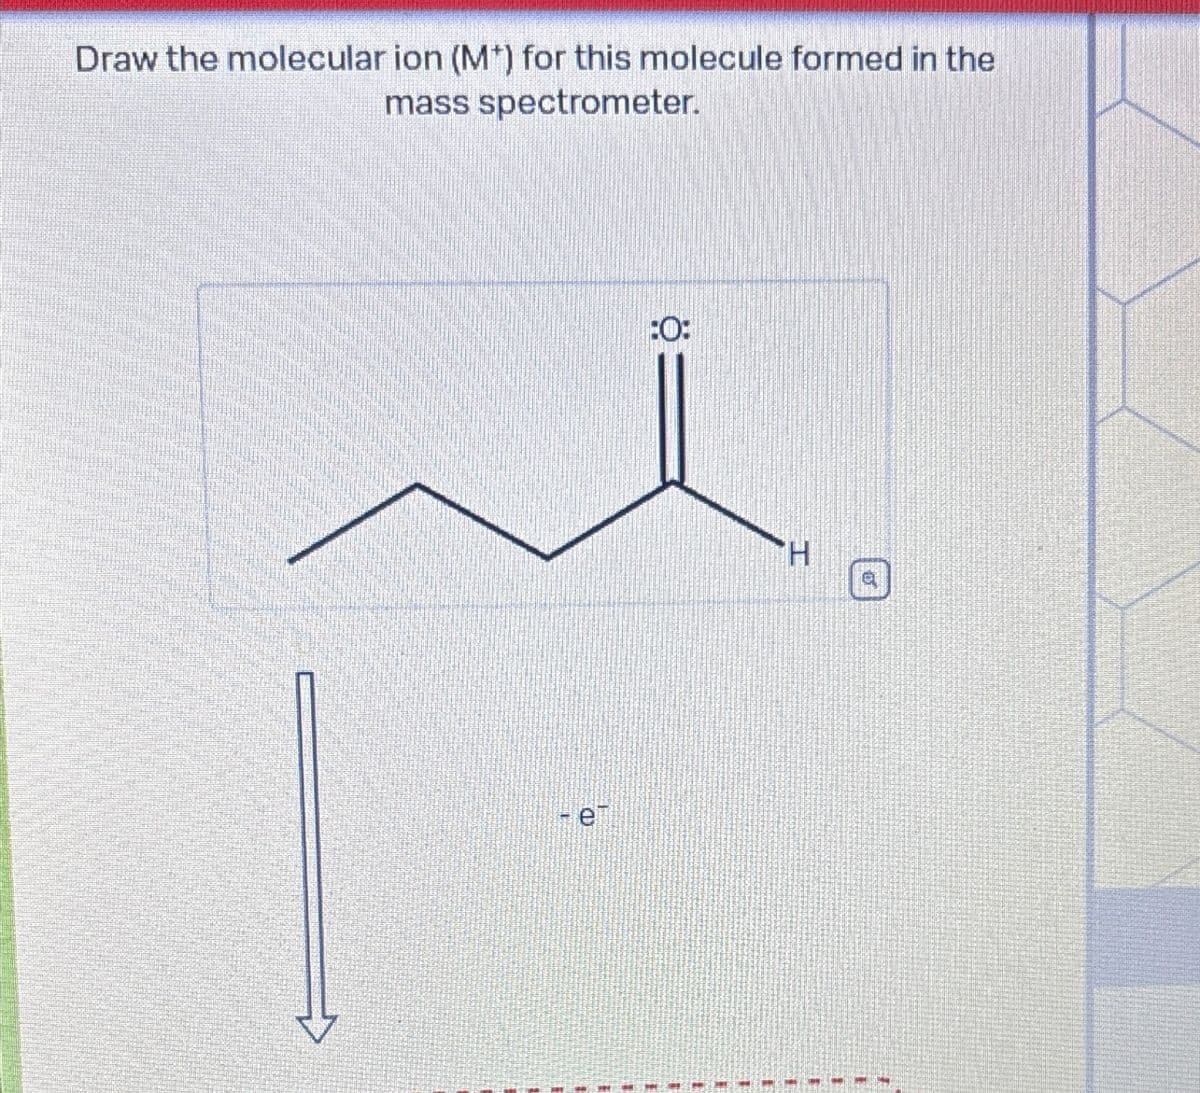 Draw the molecular ion (M*) for this molecule formed in the
mass spectrometer.
:0:
H